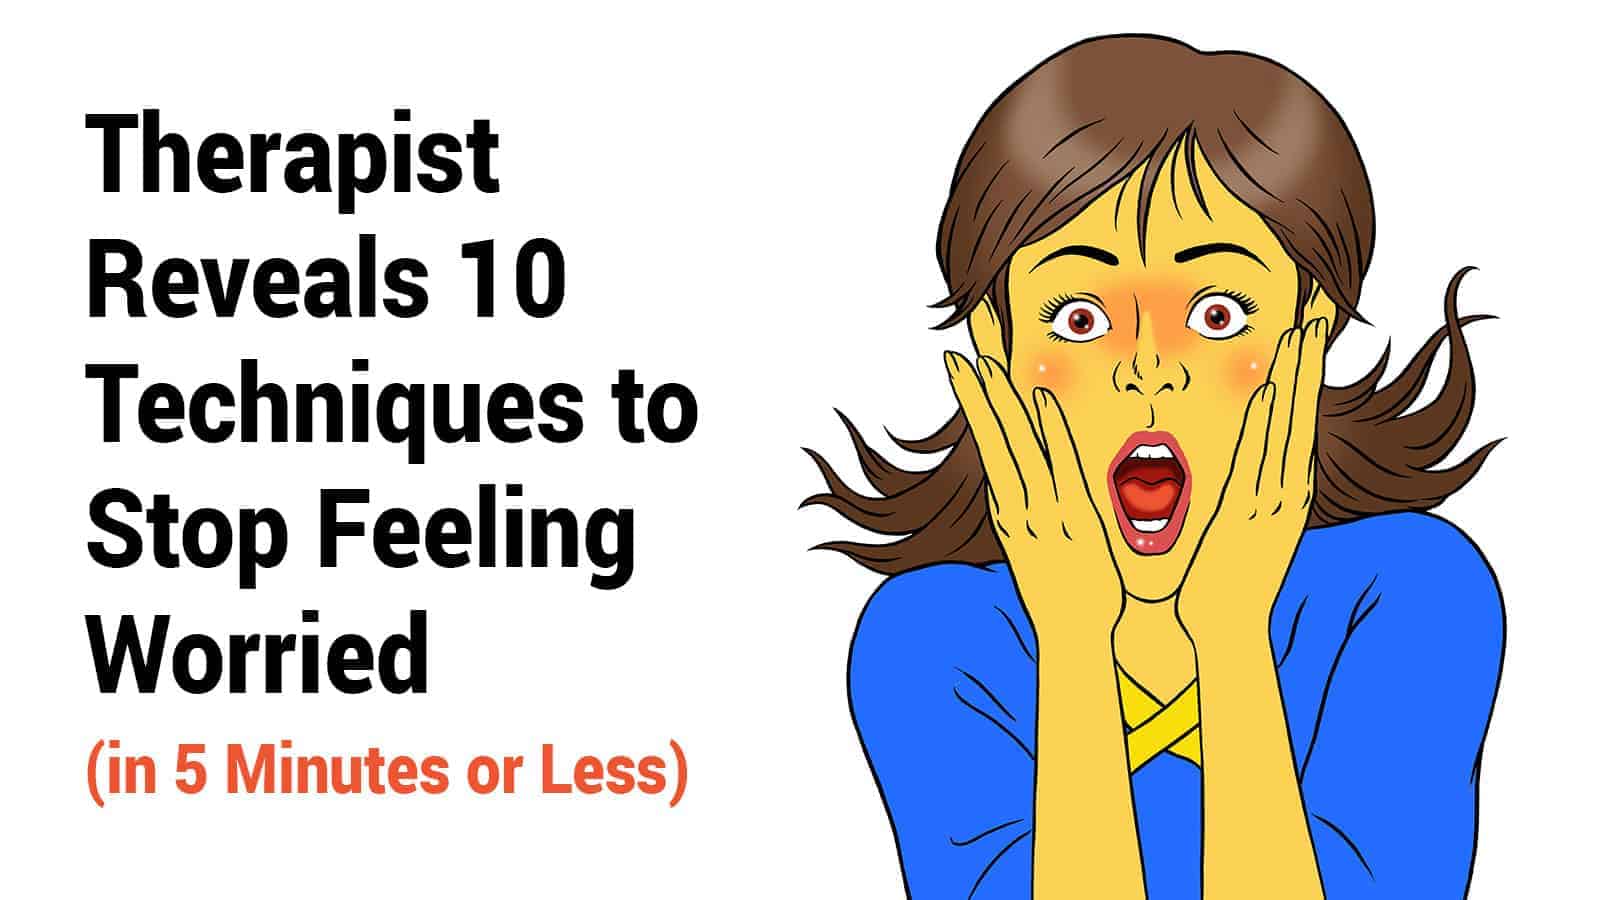 Therapist Reveals 10 Techniques to Stop Feeling Worried (in 5 Minutes or Less)